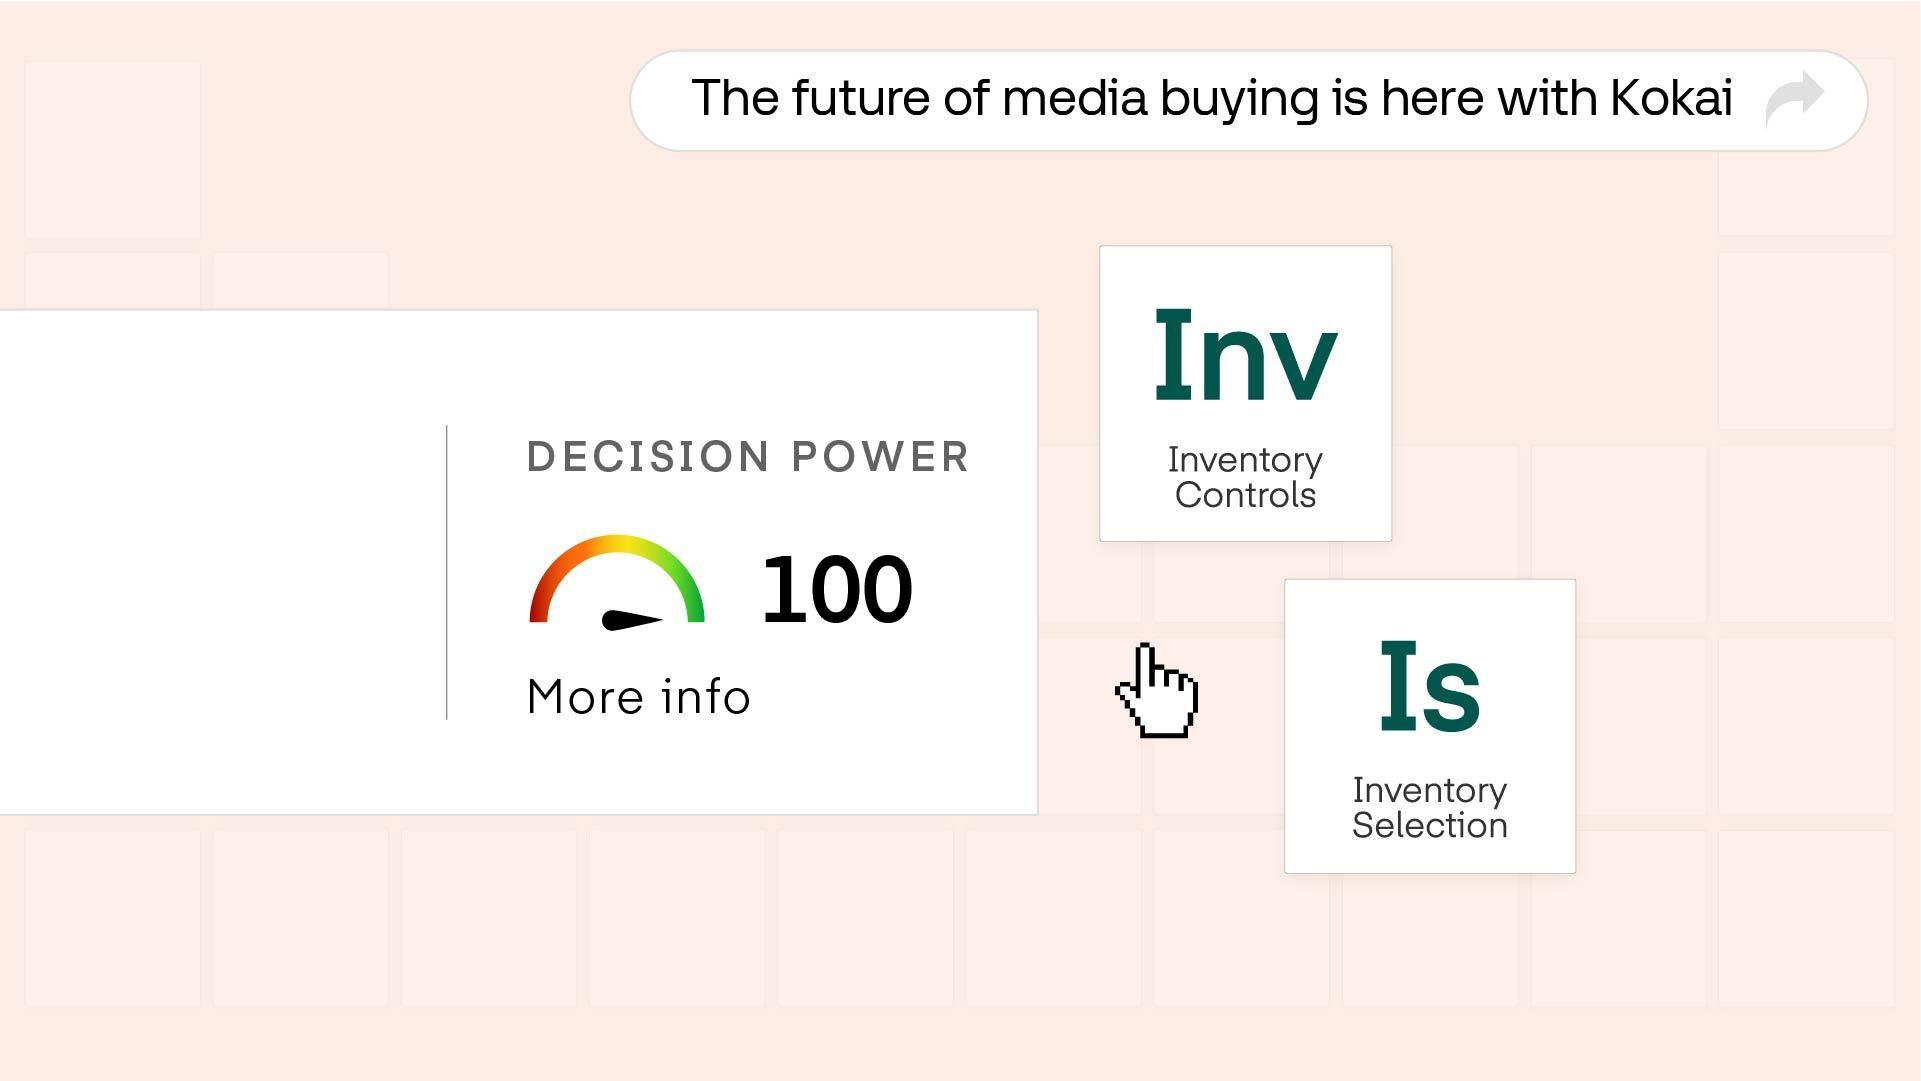 The Future of Media Buying is here with Kokai - The Trade Desk